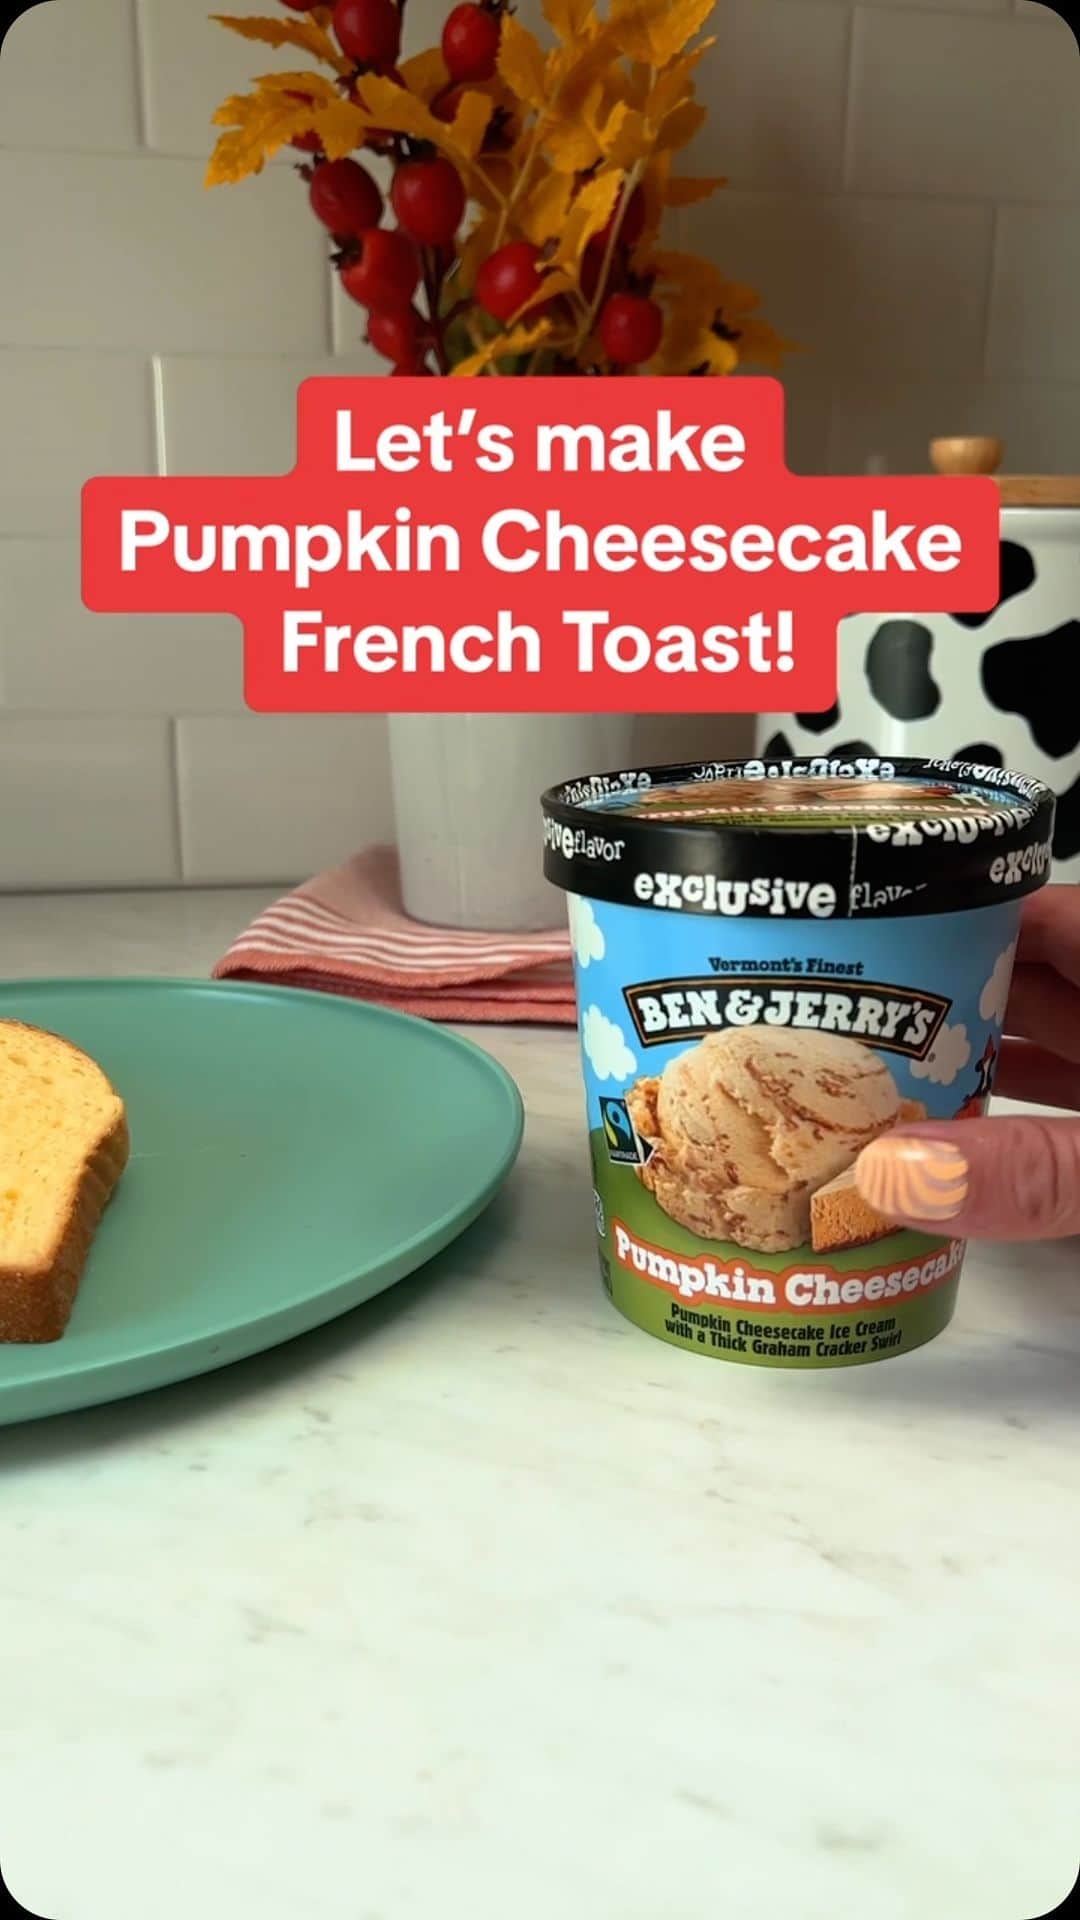 Ben & Jerry'sのインスタグラム：「The toppings make this especially *chef’s kiss* #benandjerrys #icecream #frenchtoast #recipe #icecreamfrenchtoast #pumpkin #fall #pumpkincheesecake」